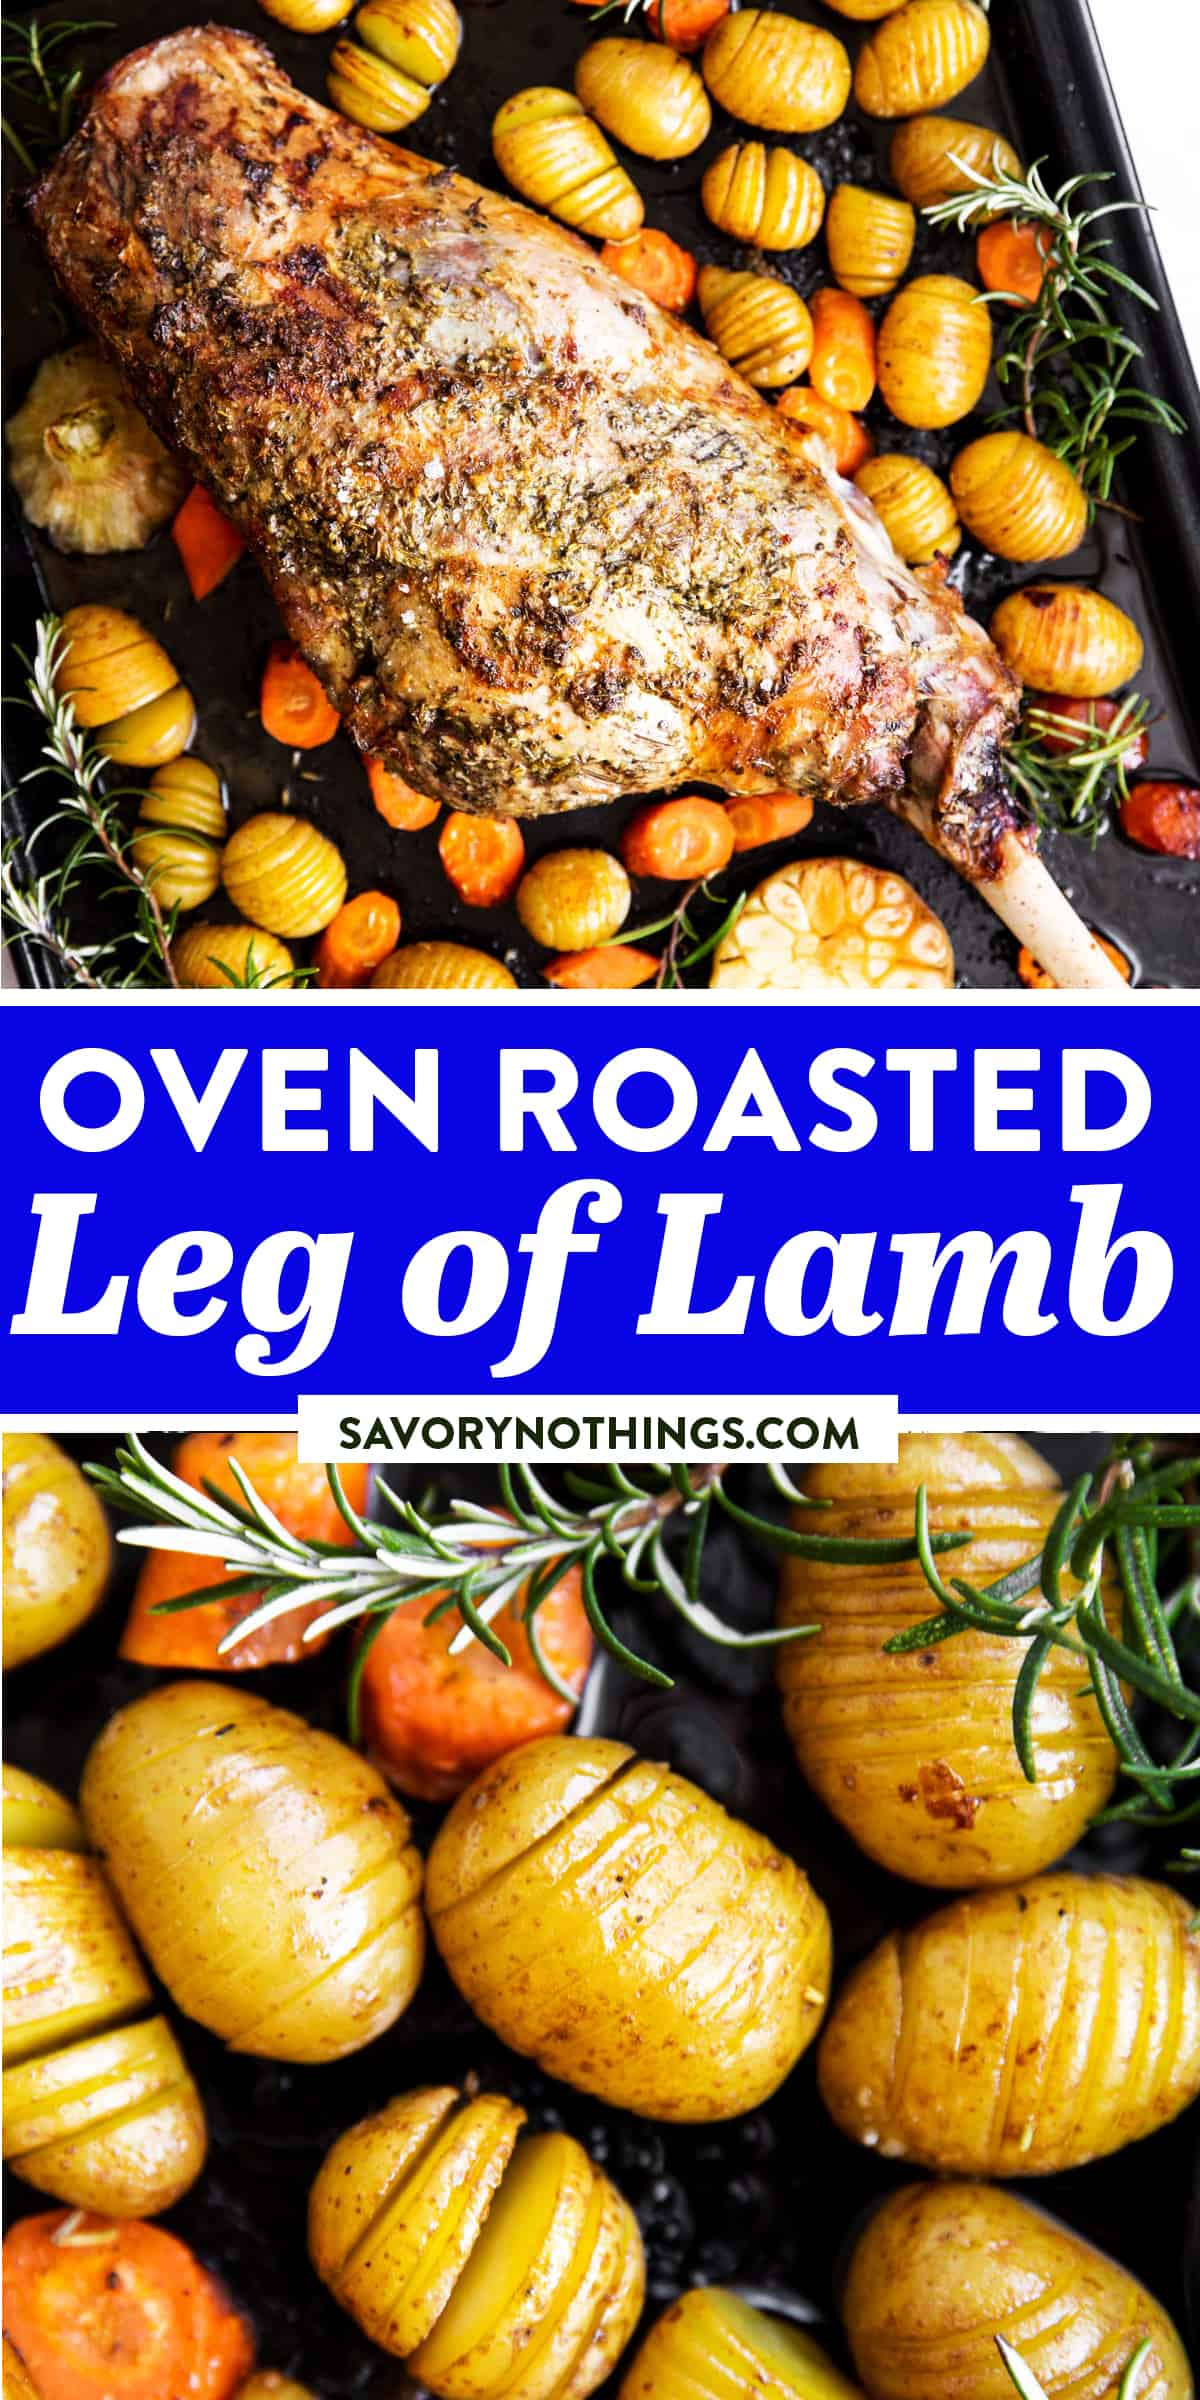 Oven Roasted Leg of Lamb Recipe [+ Video] | Savory Nothings